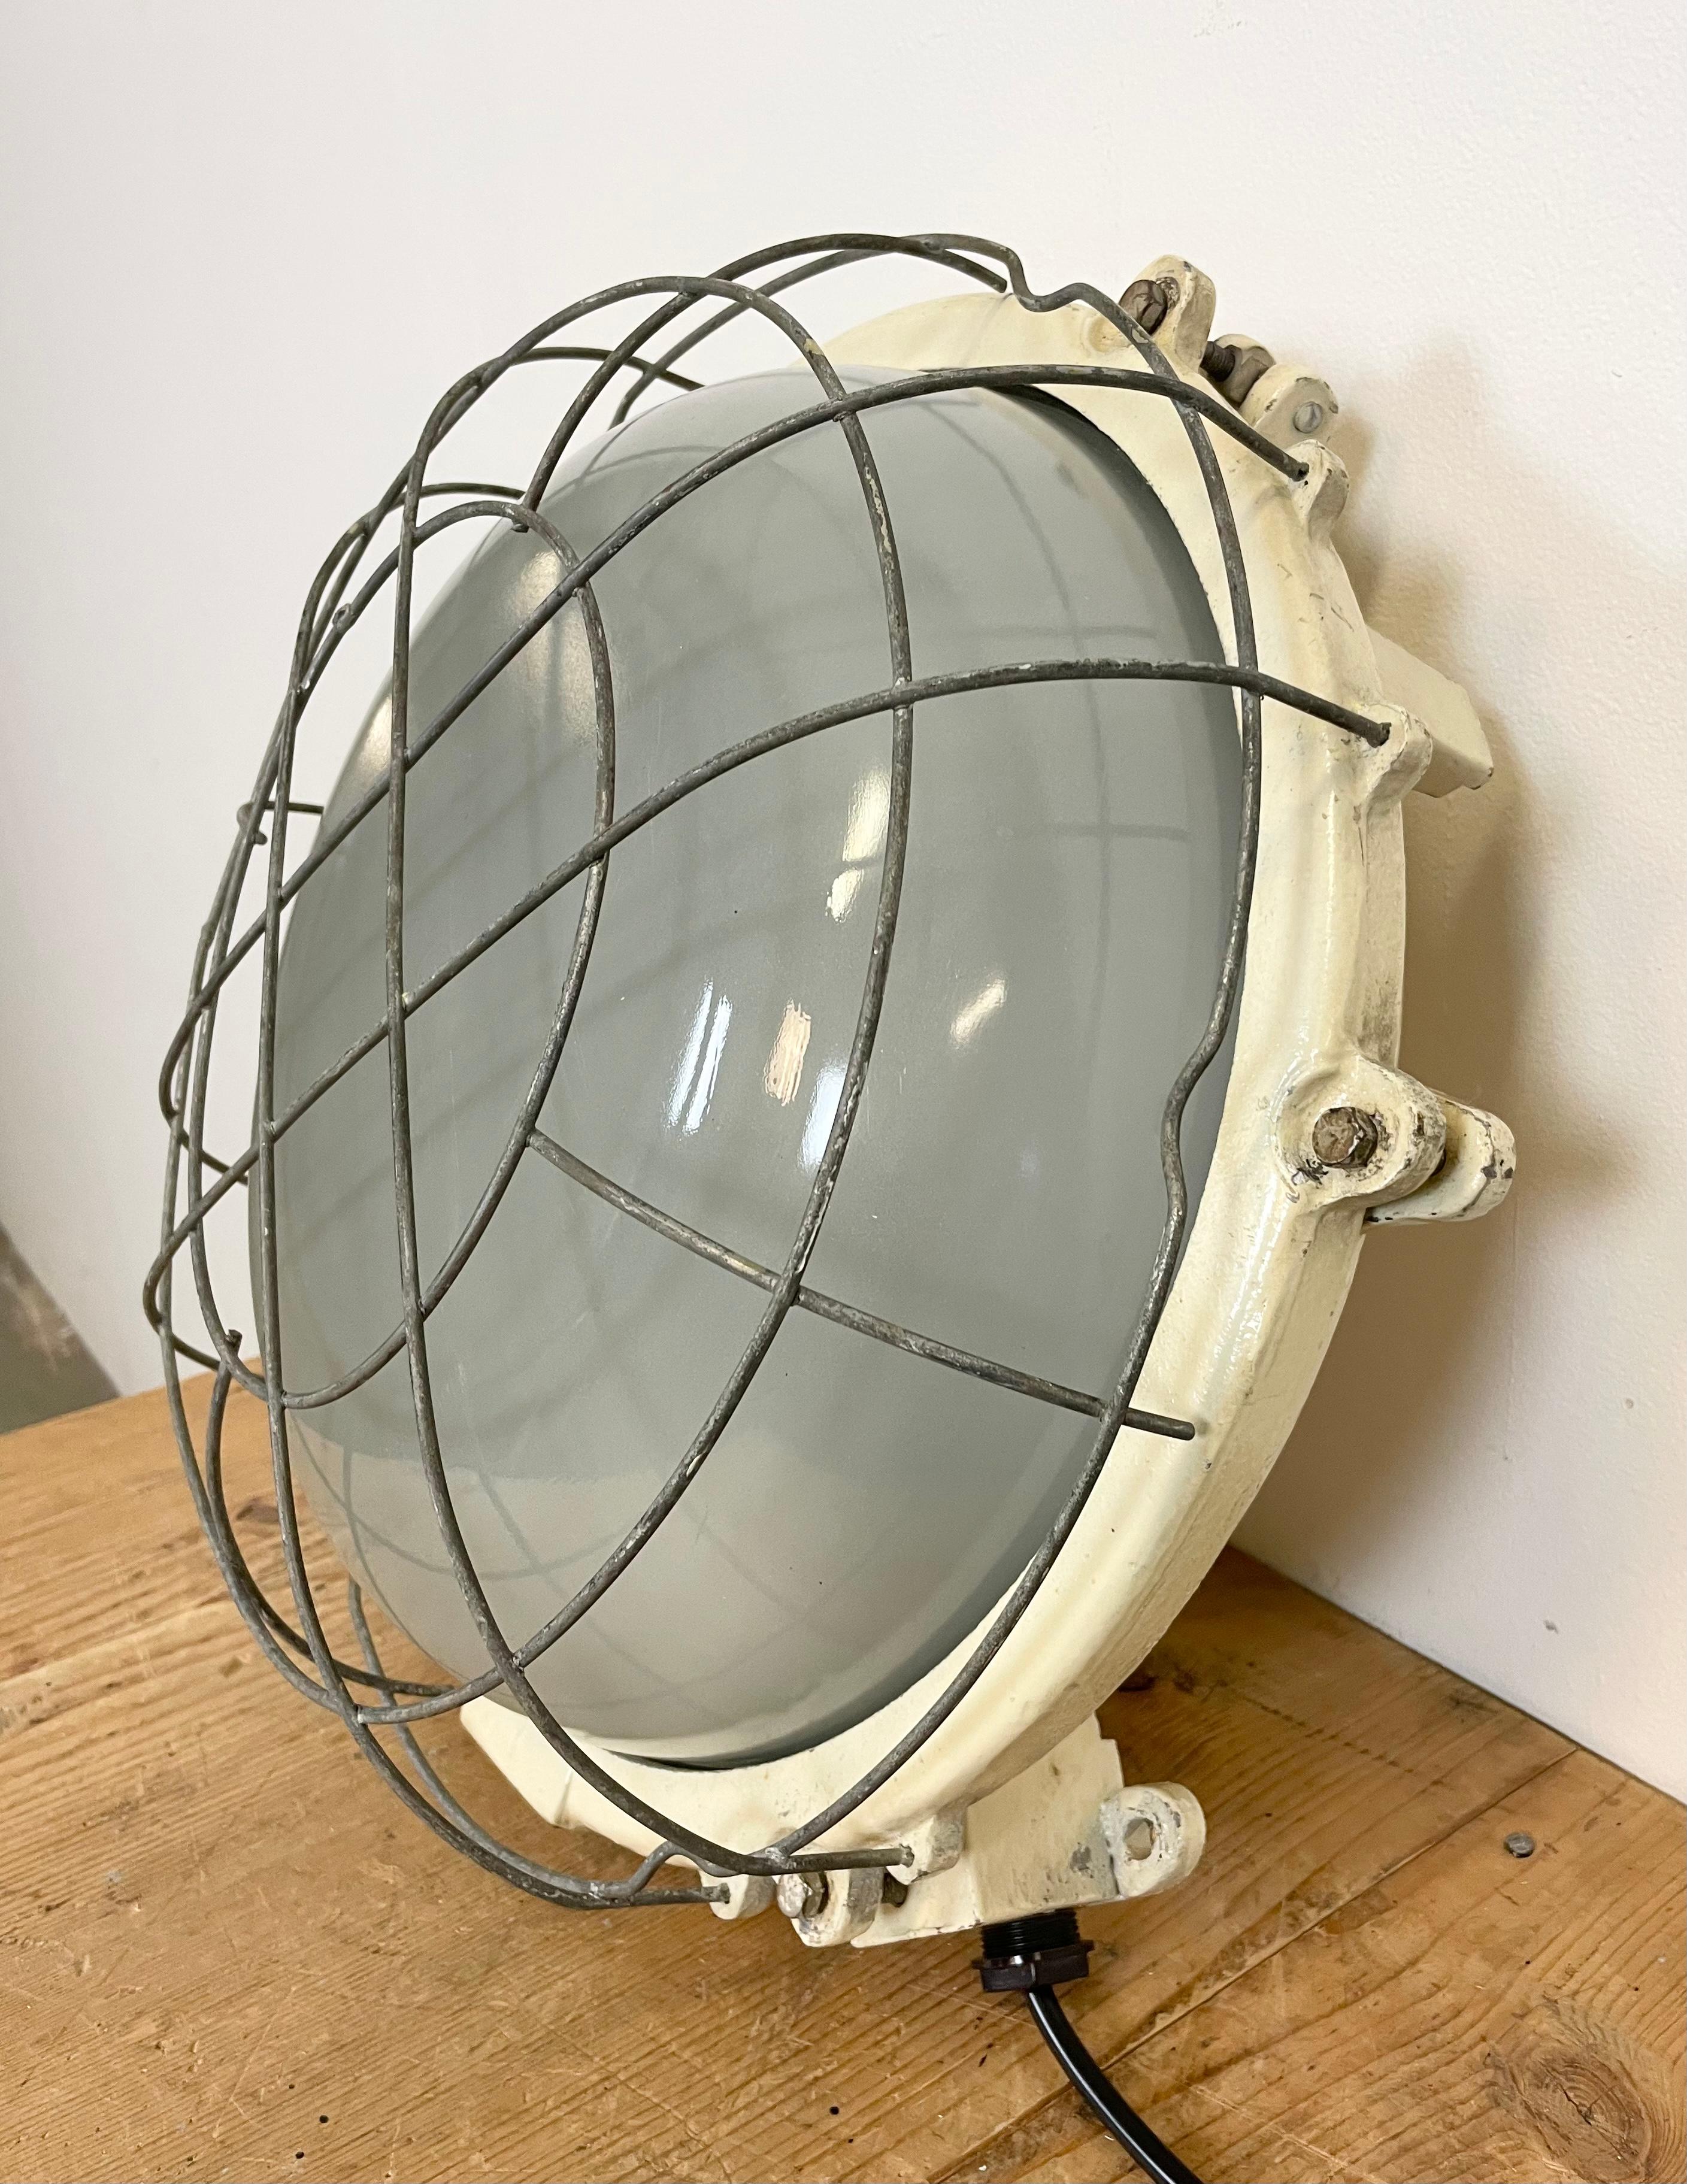 Vintage industrial cast iron wall lamp made by Elektrosvit in former Czechoslovakia during the 1970s. It features a cast iron body, milky curved glass cover and iron grid. Two porcelain sockets require E 27 light bulbs. It can be also used as a